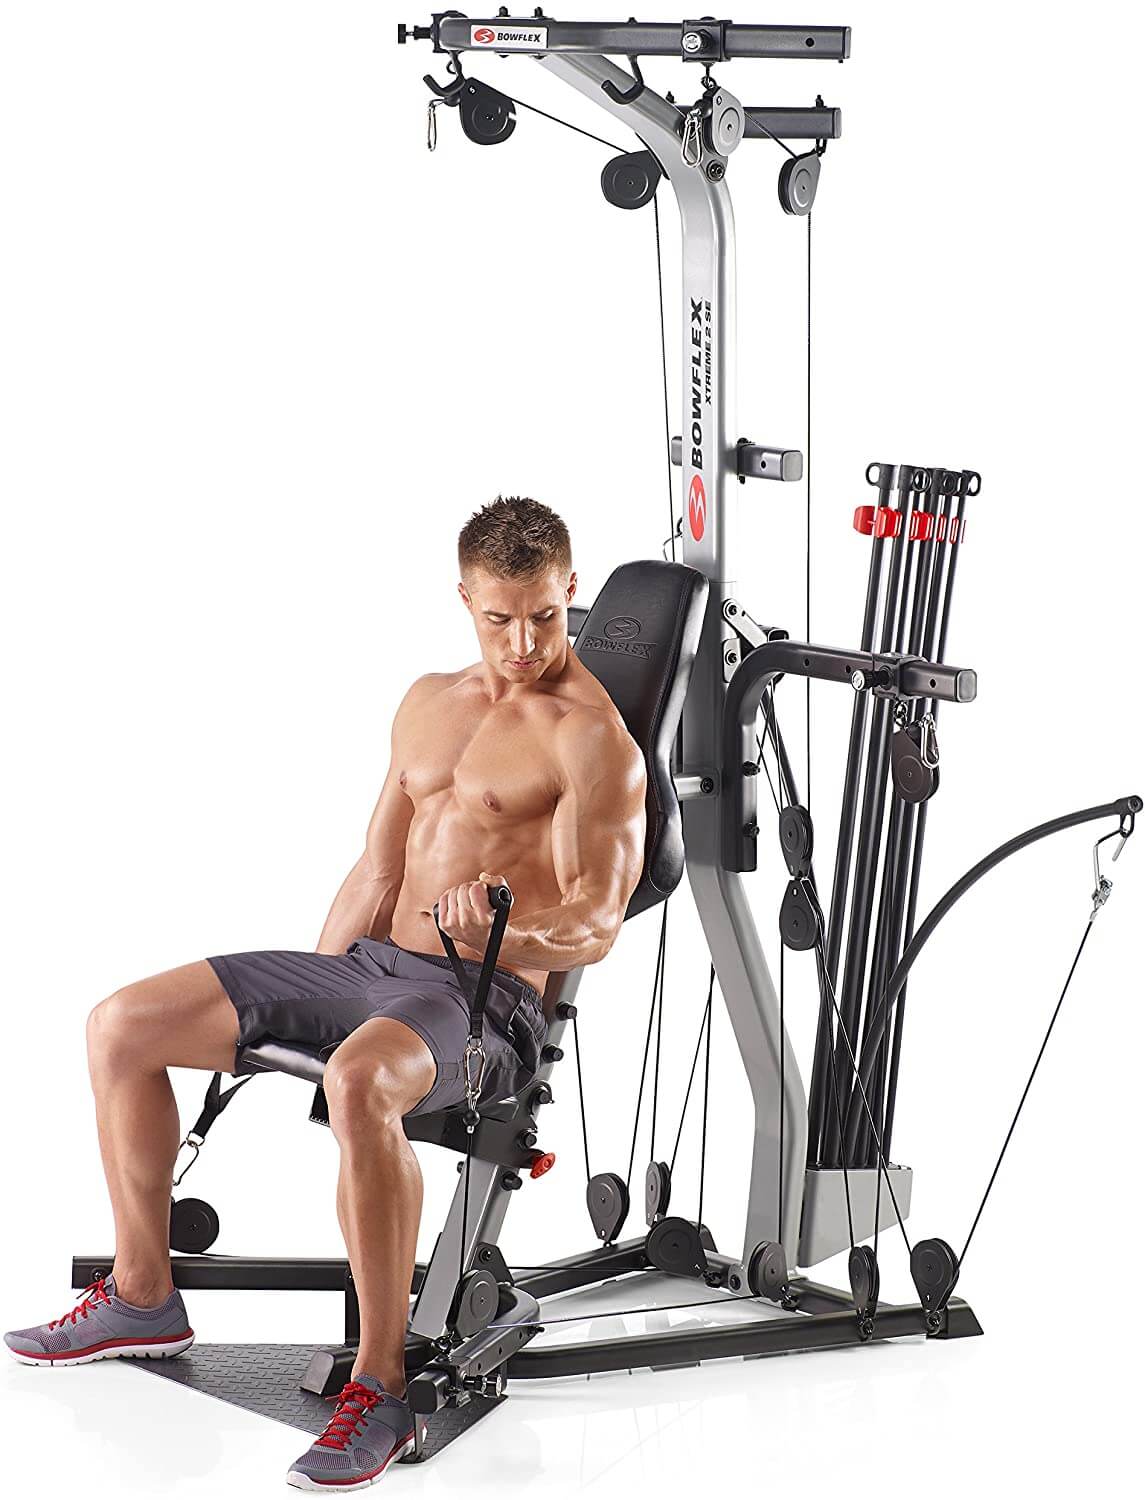 6 Day Soloflex Workout Machine for Burn Fat fast